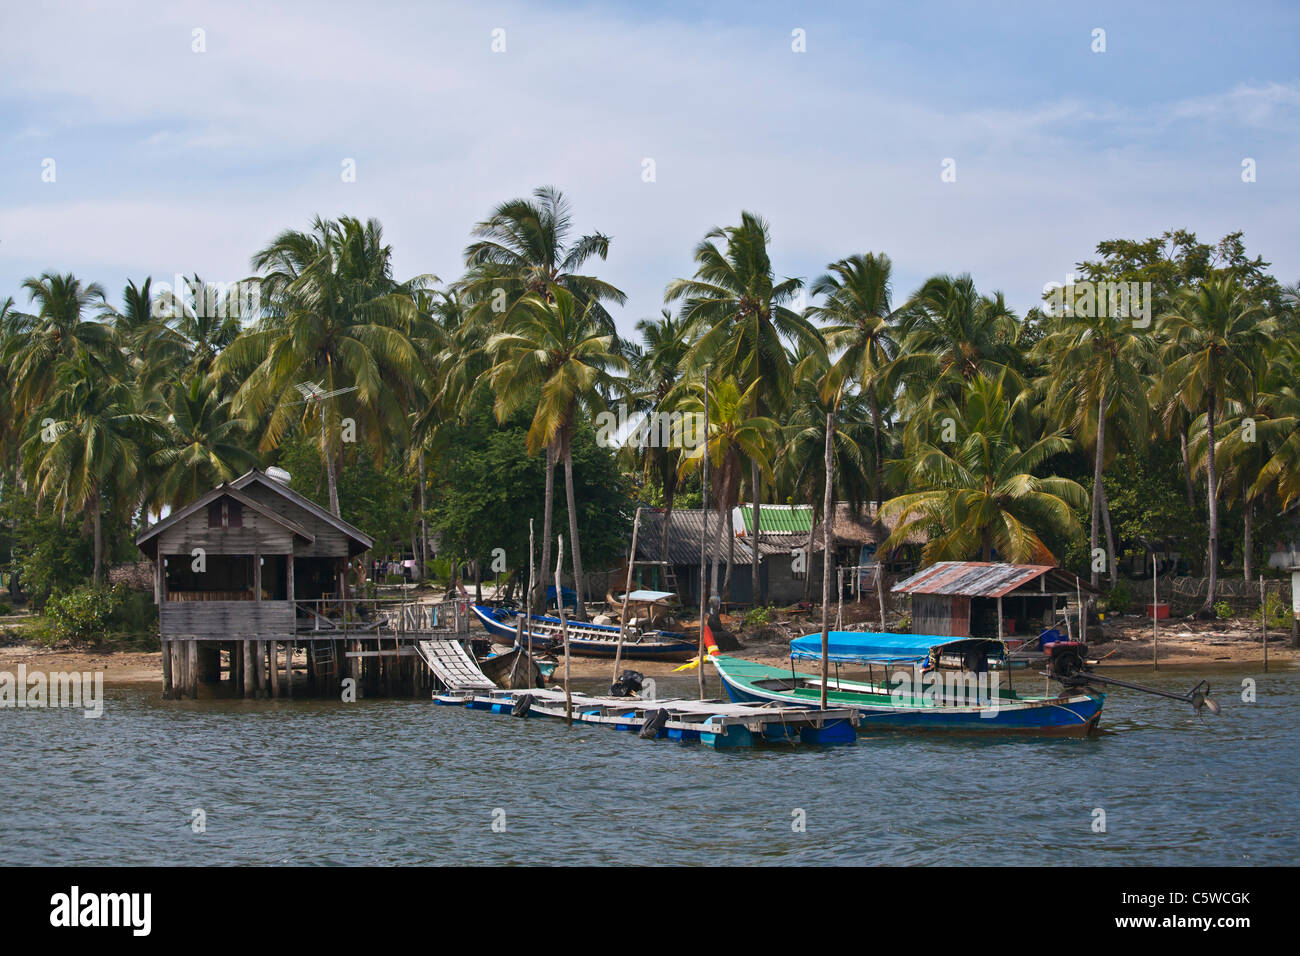 The dock of a fishing village on KOH PHRA THONG ISLAND located in the Andaman Sea - THAILAND Stock Photo